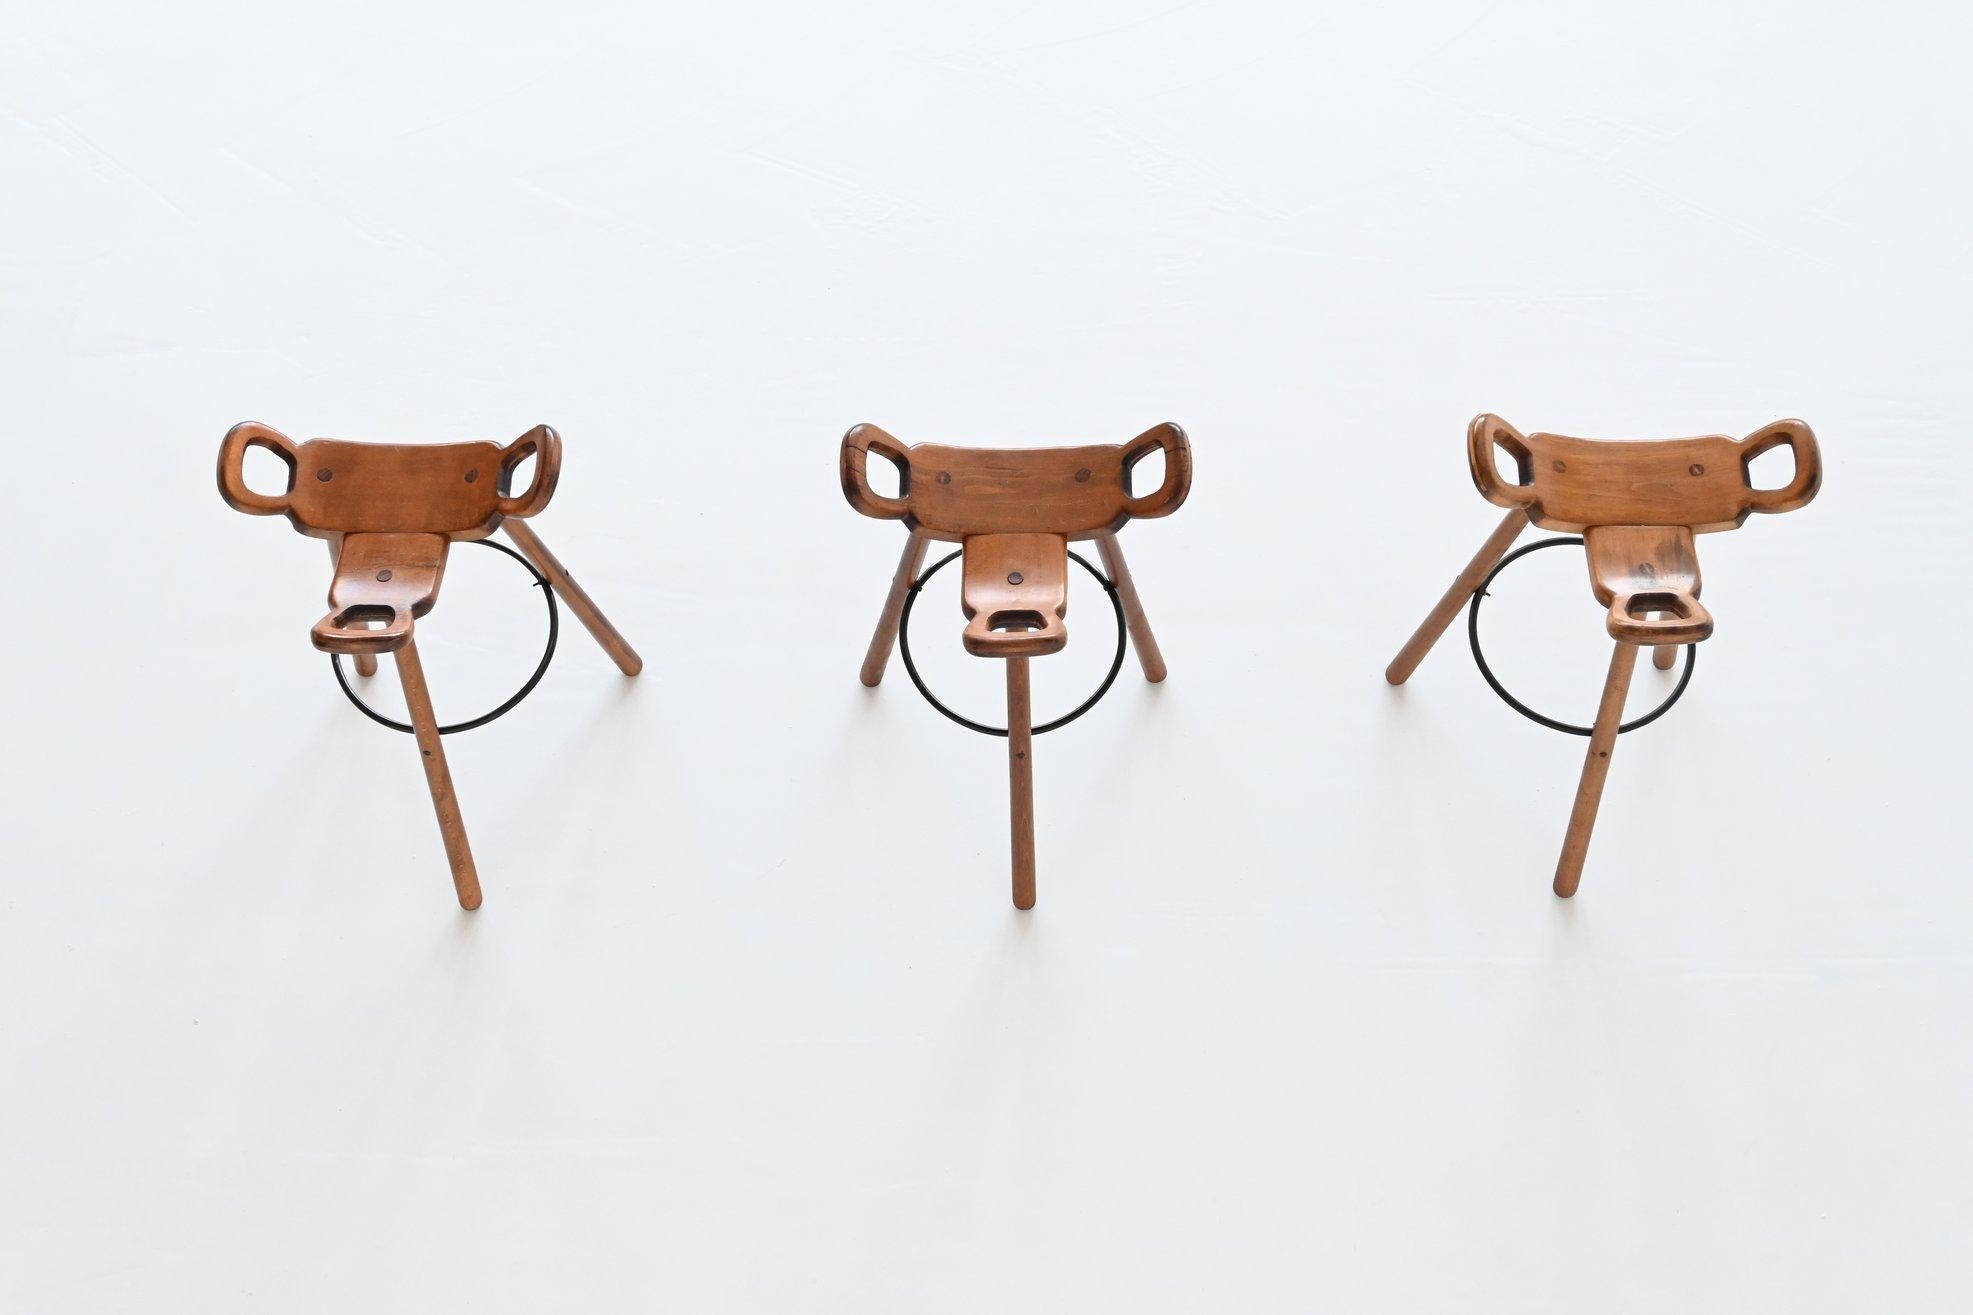 Stained Confonorm Set of Three Marbella Brutalist Bar Stools Spain, 1970